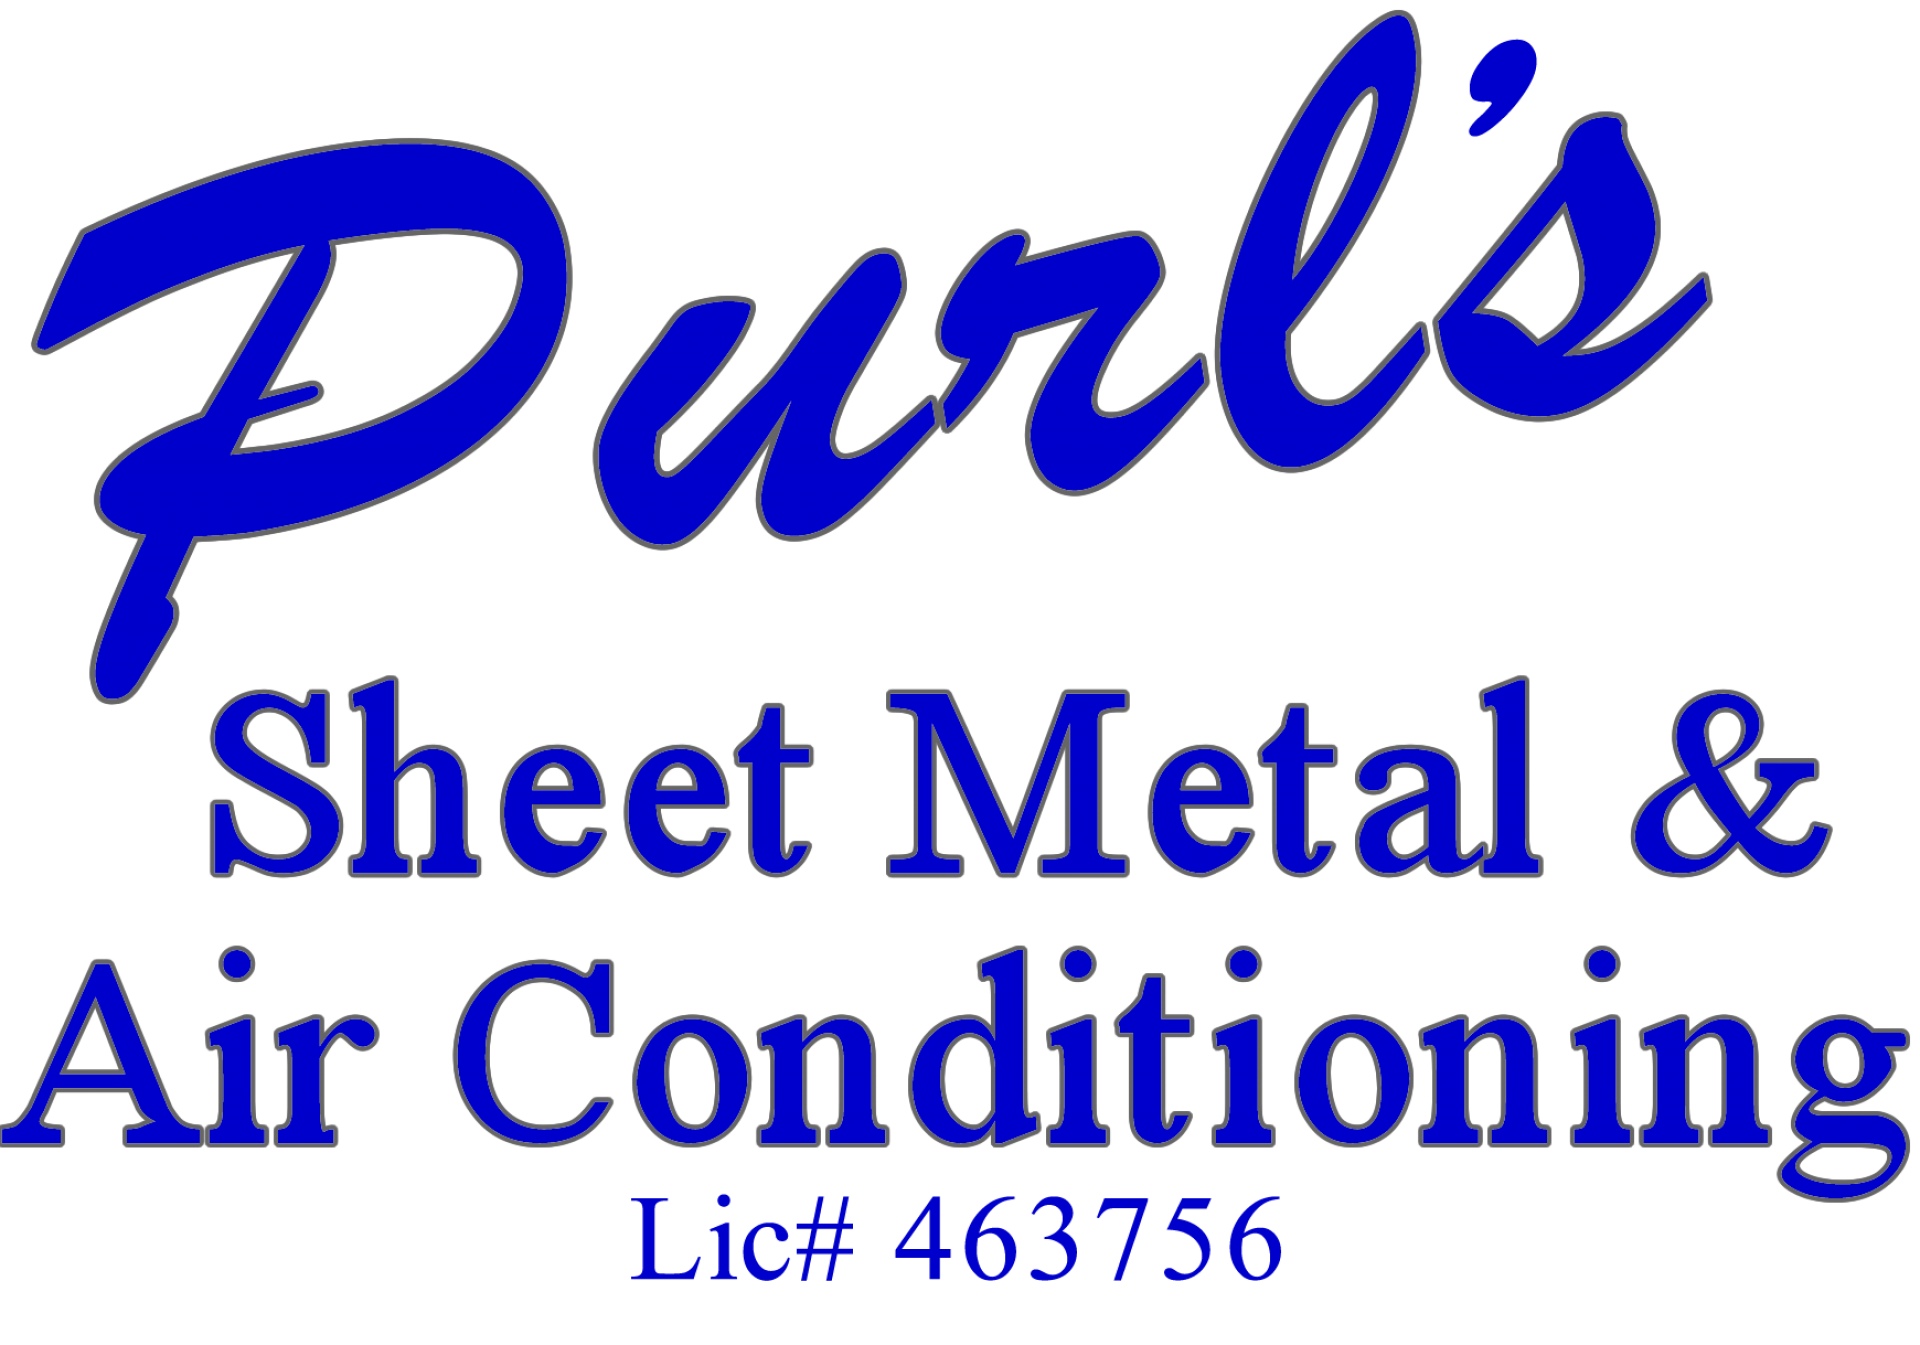 Purl's Sheet Metal & Air Conditioning company logo